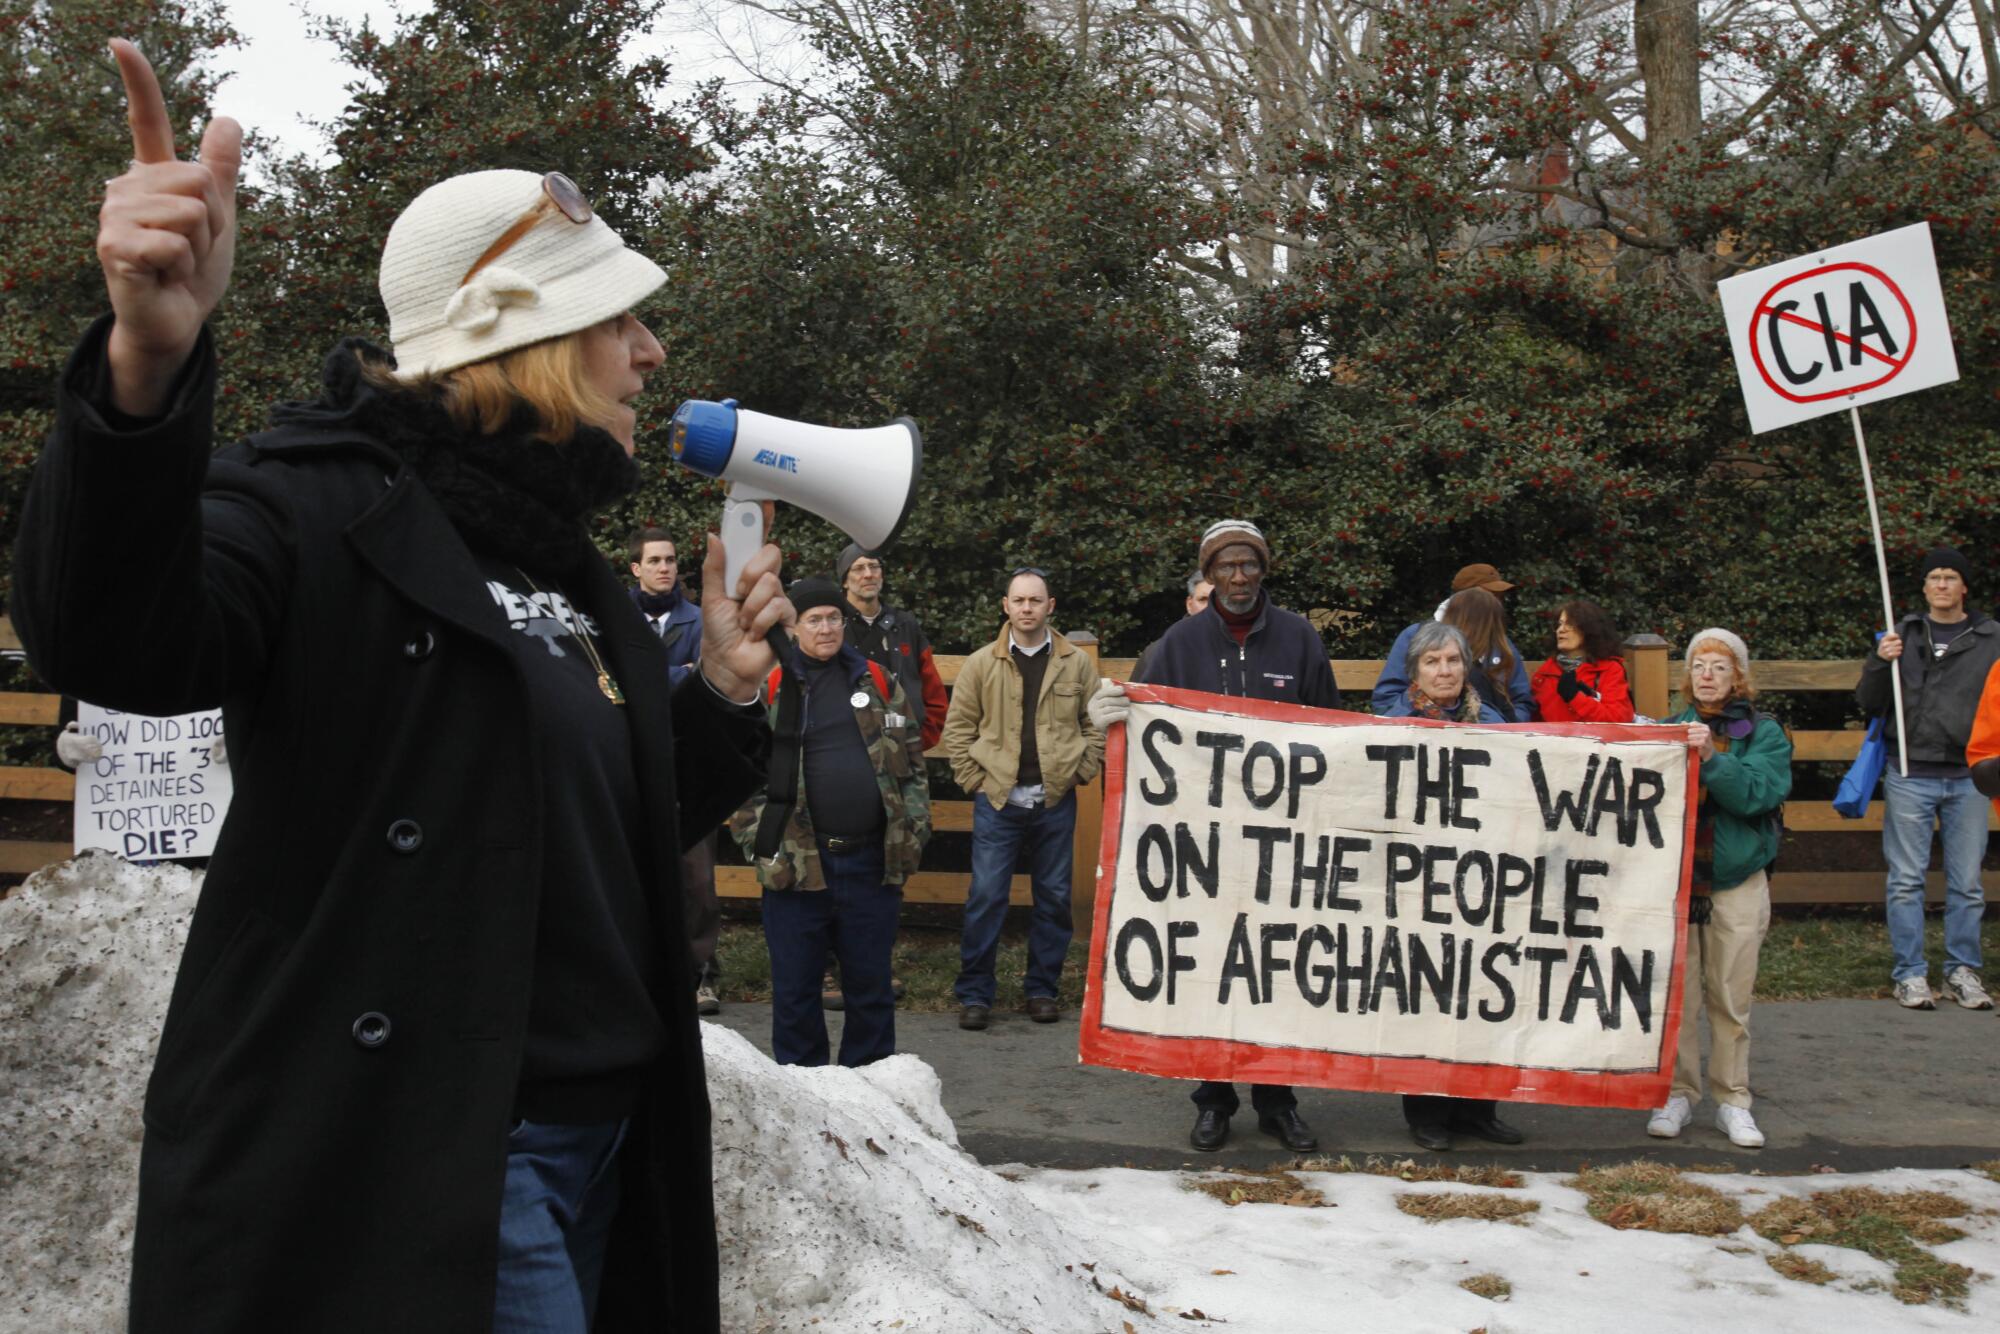 Cindy Sheehan points down the road toward former Vice President Dick Cheney's house during an antiwar protest in 2010.